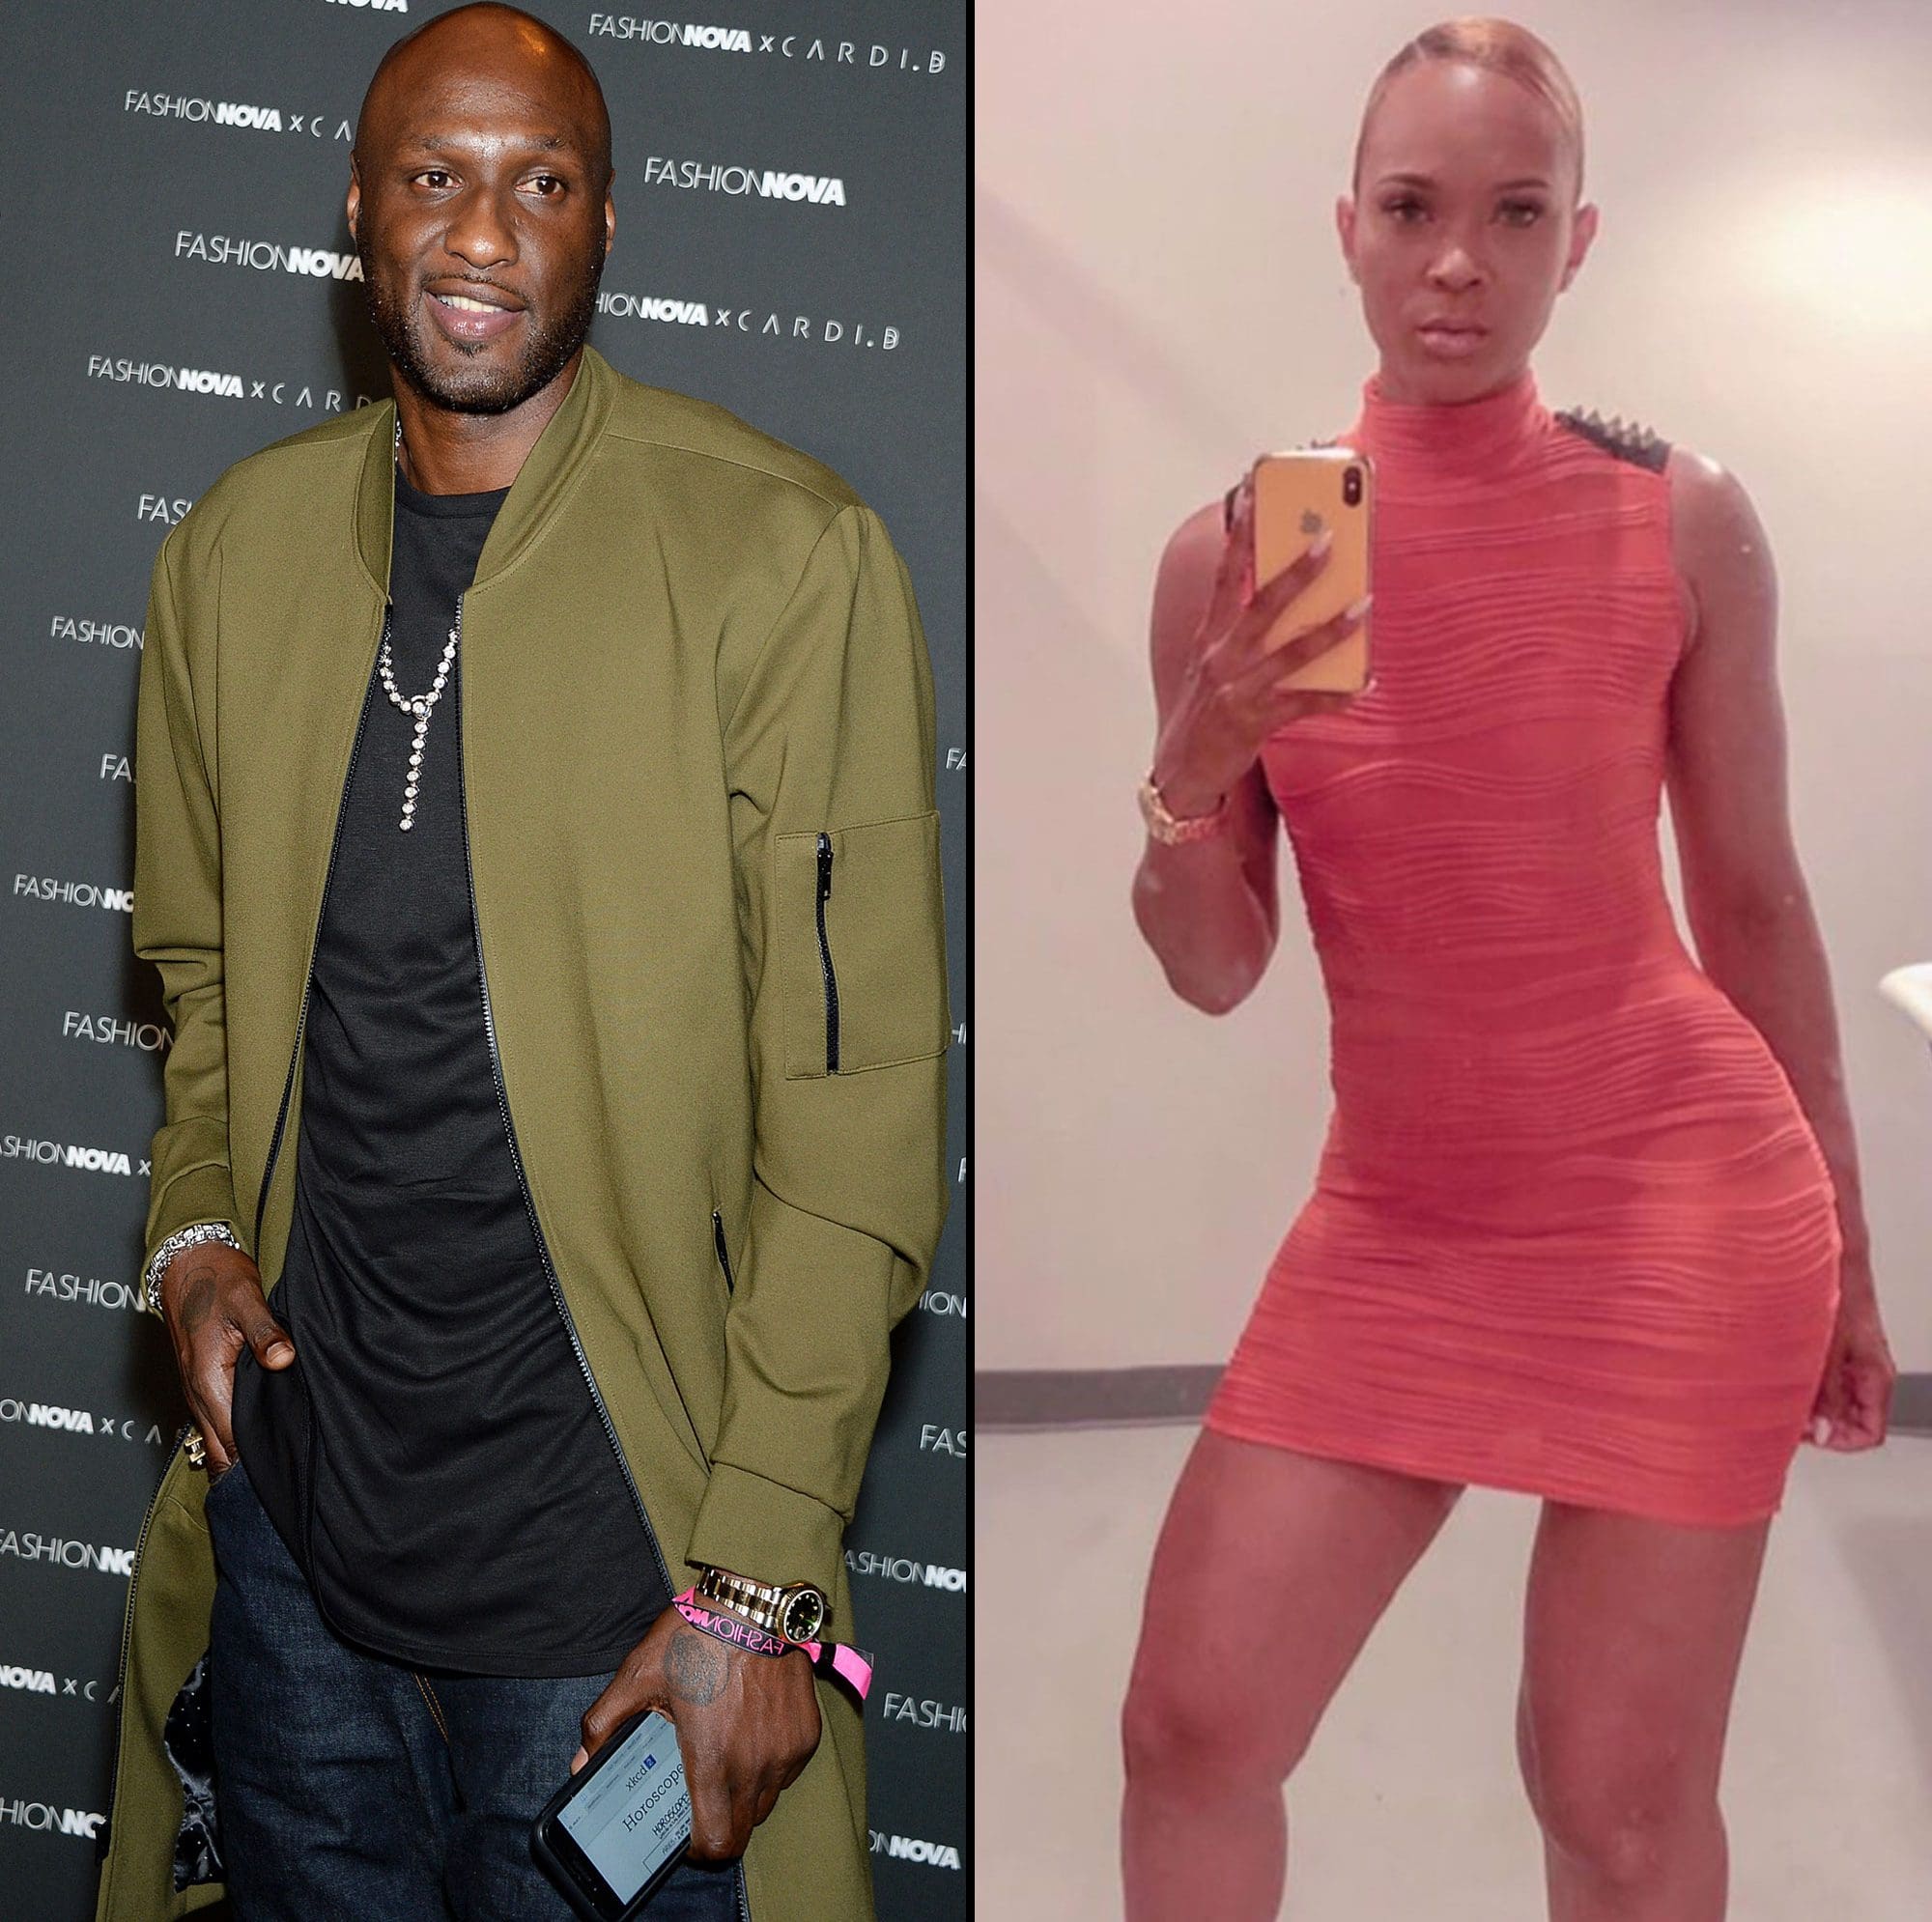 Lamar Odom And His New GF, Sabrina Parr Are Spotted Showing Love To Each Other - See The Video